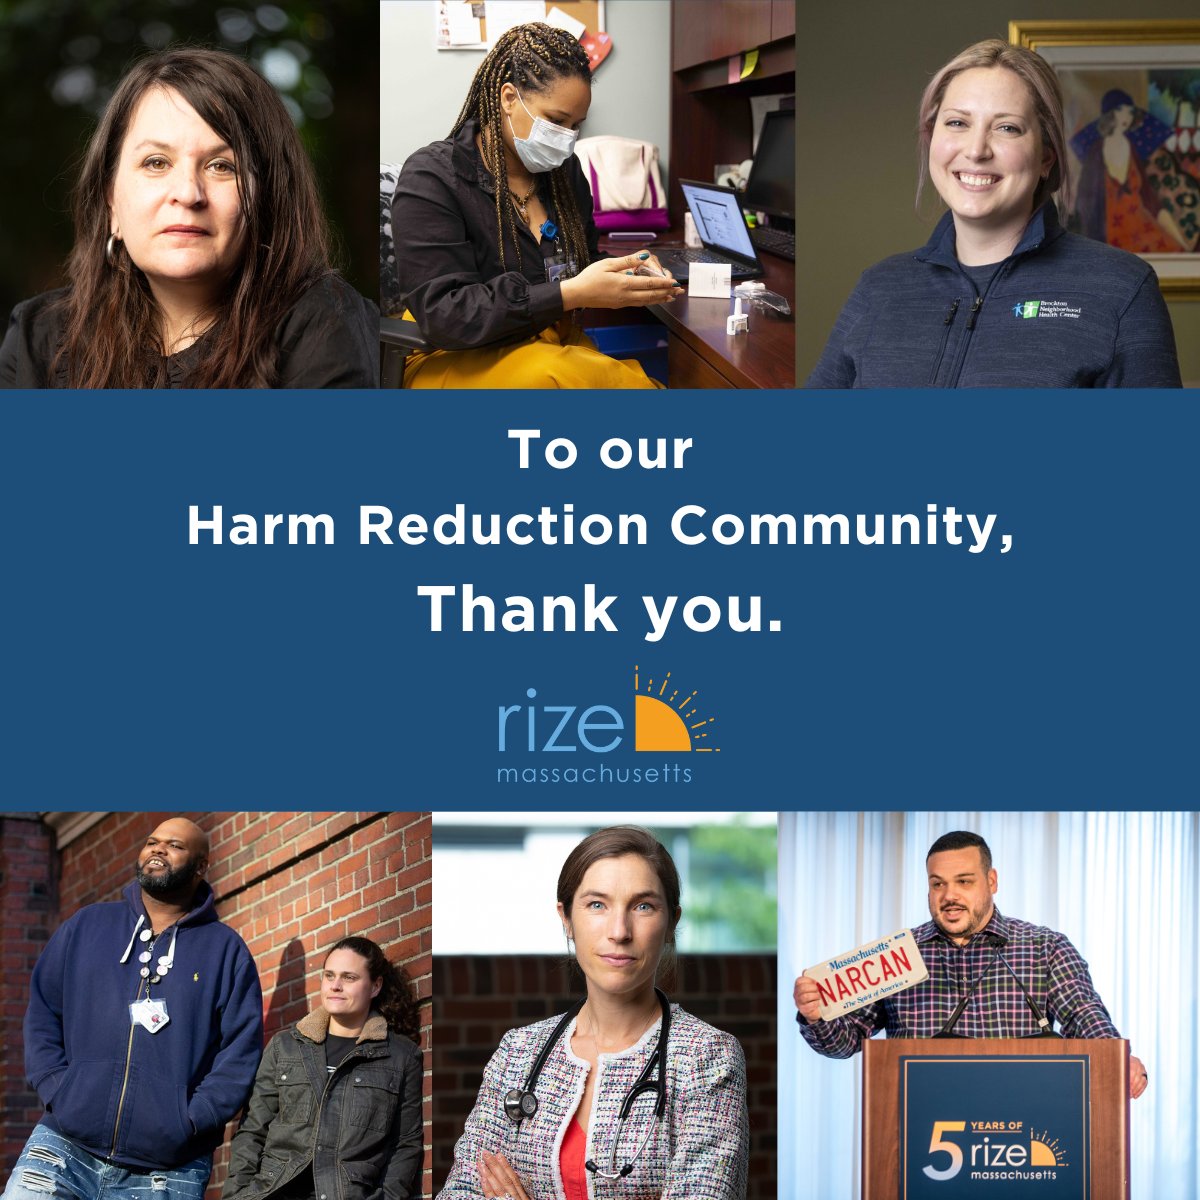 This #HarmReductionDay we celebrate our harm reduction workers who show up on the frontlines meeting people where they're at and keeping them alive and safe, no matter who they are or where they live. Because of you, our communities are stronger. #harmreductionsaveslives